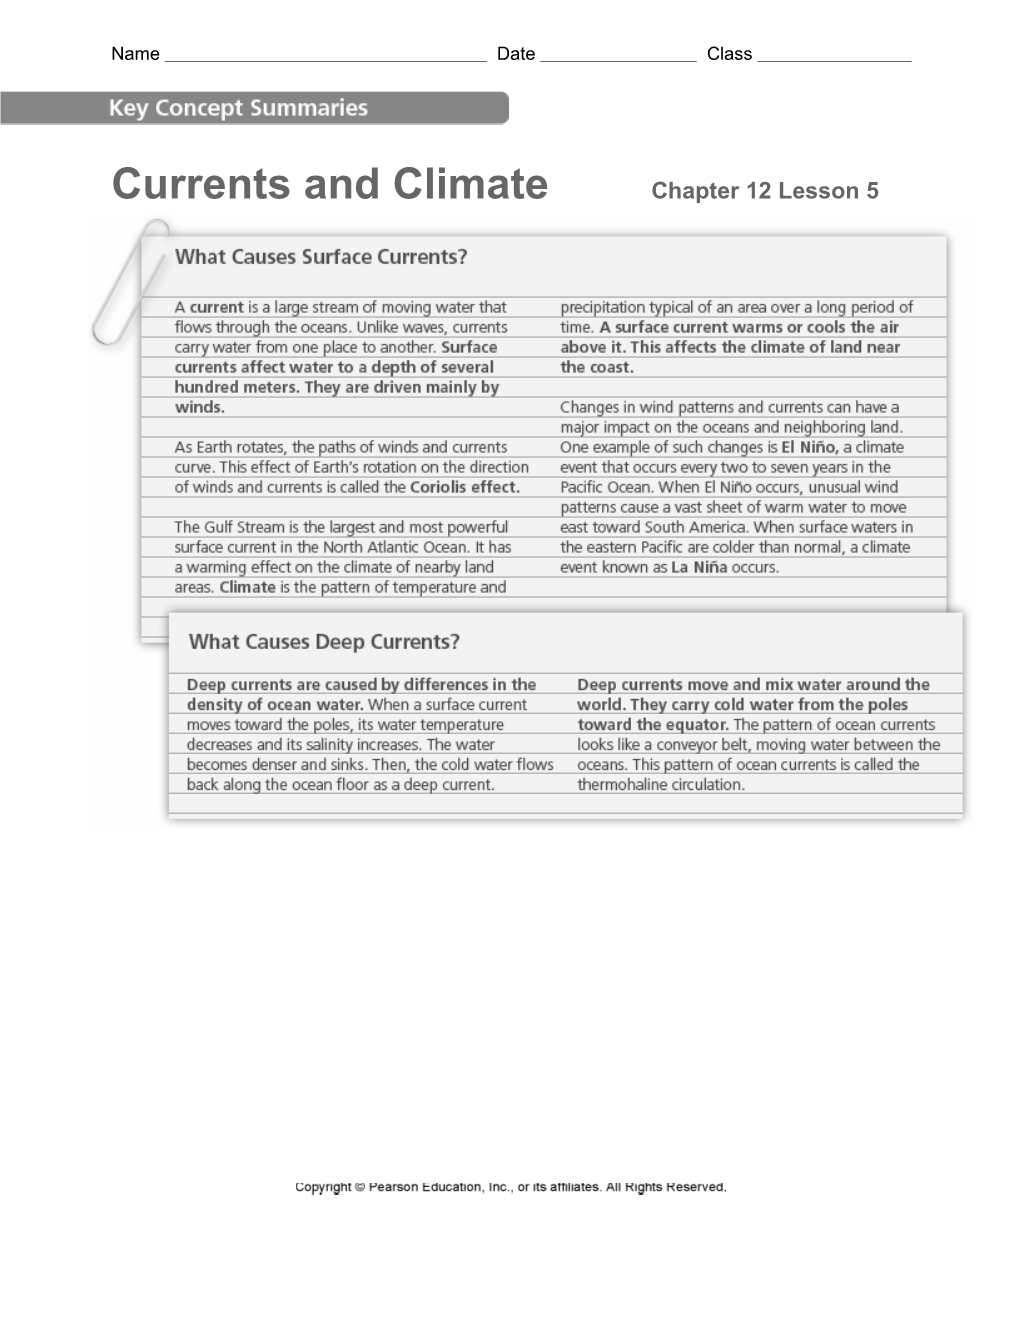 Currents and Climatechapter 12 Lesson 5